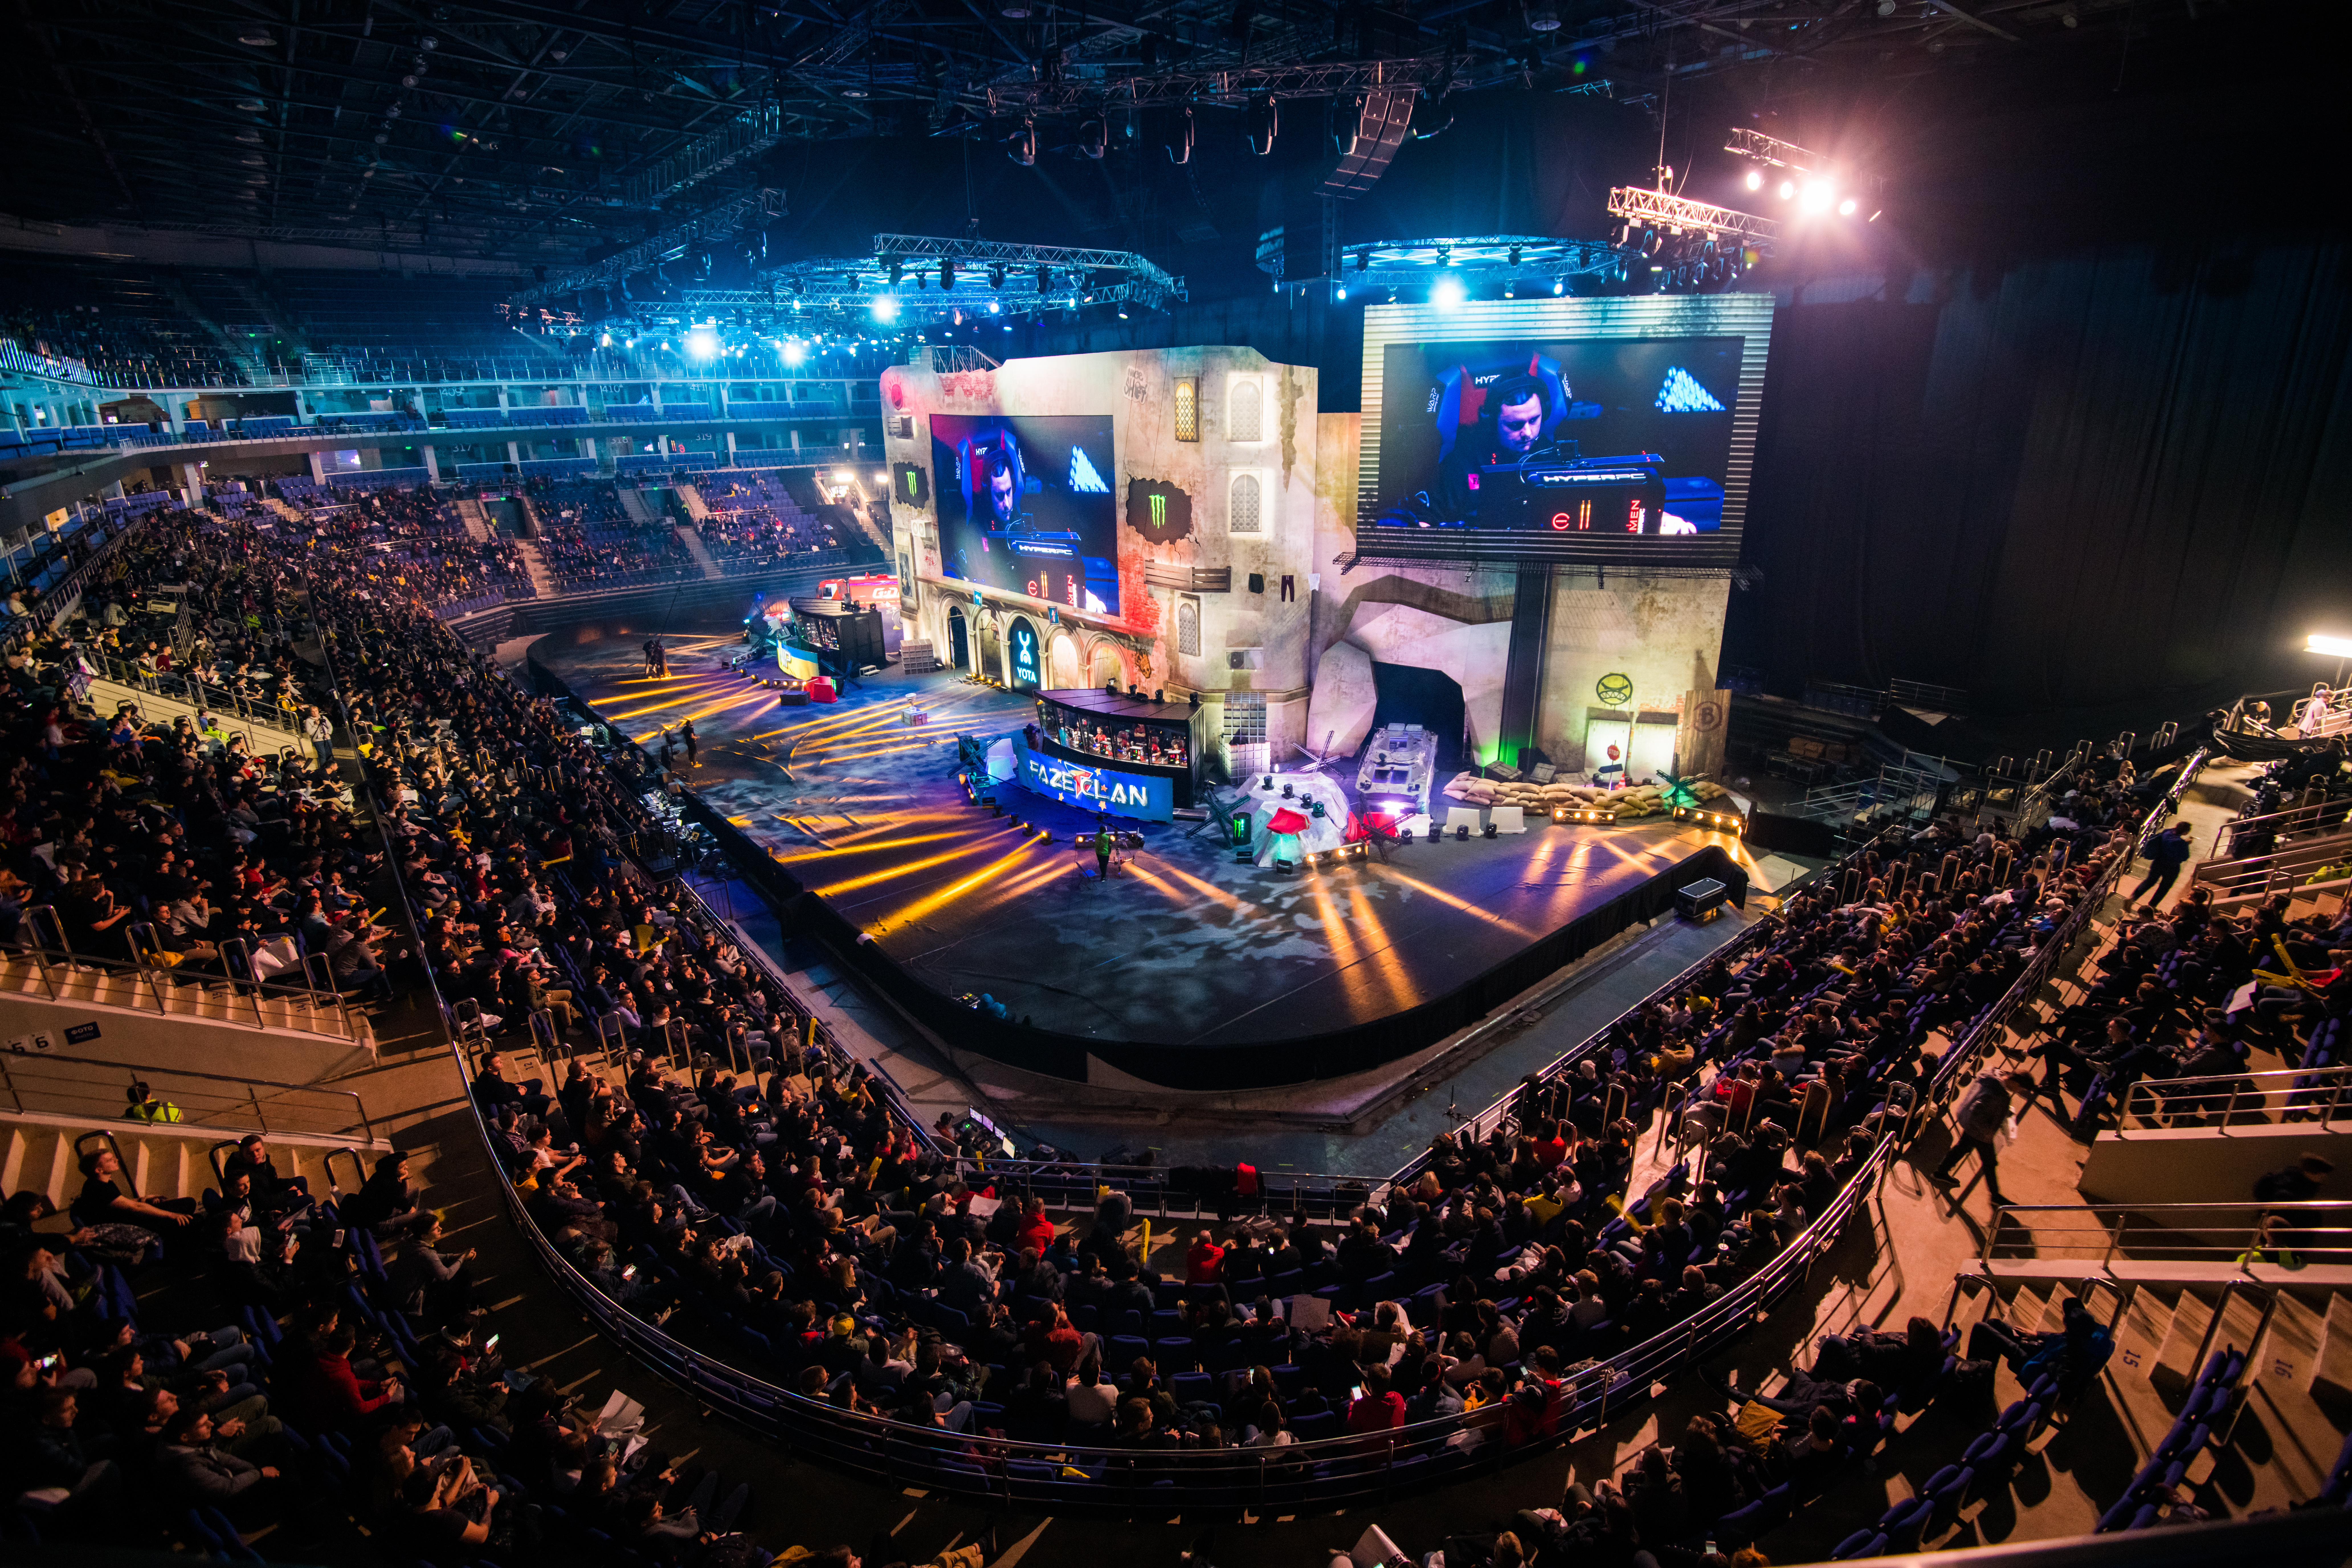 A beginner’s guide: How to watch esports